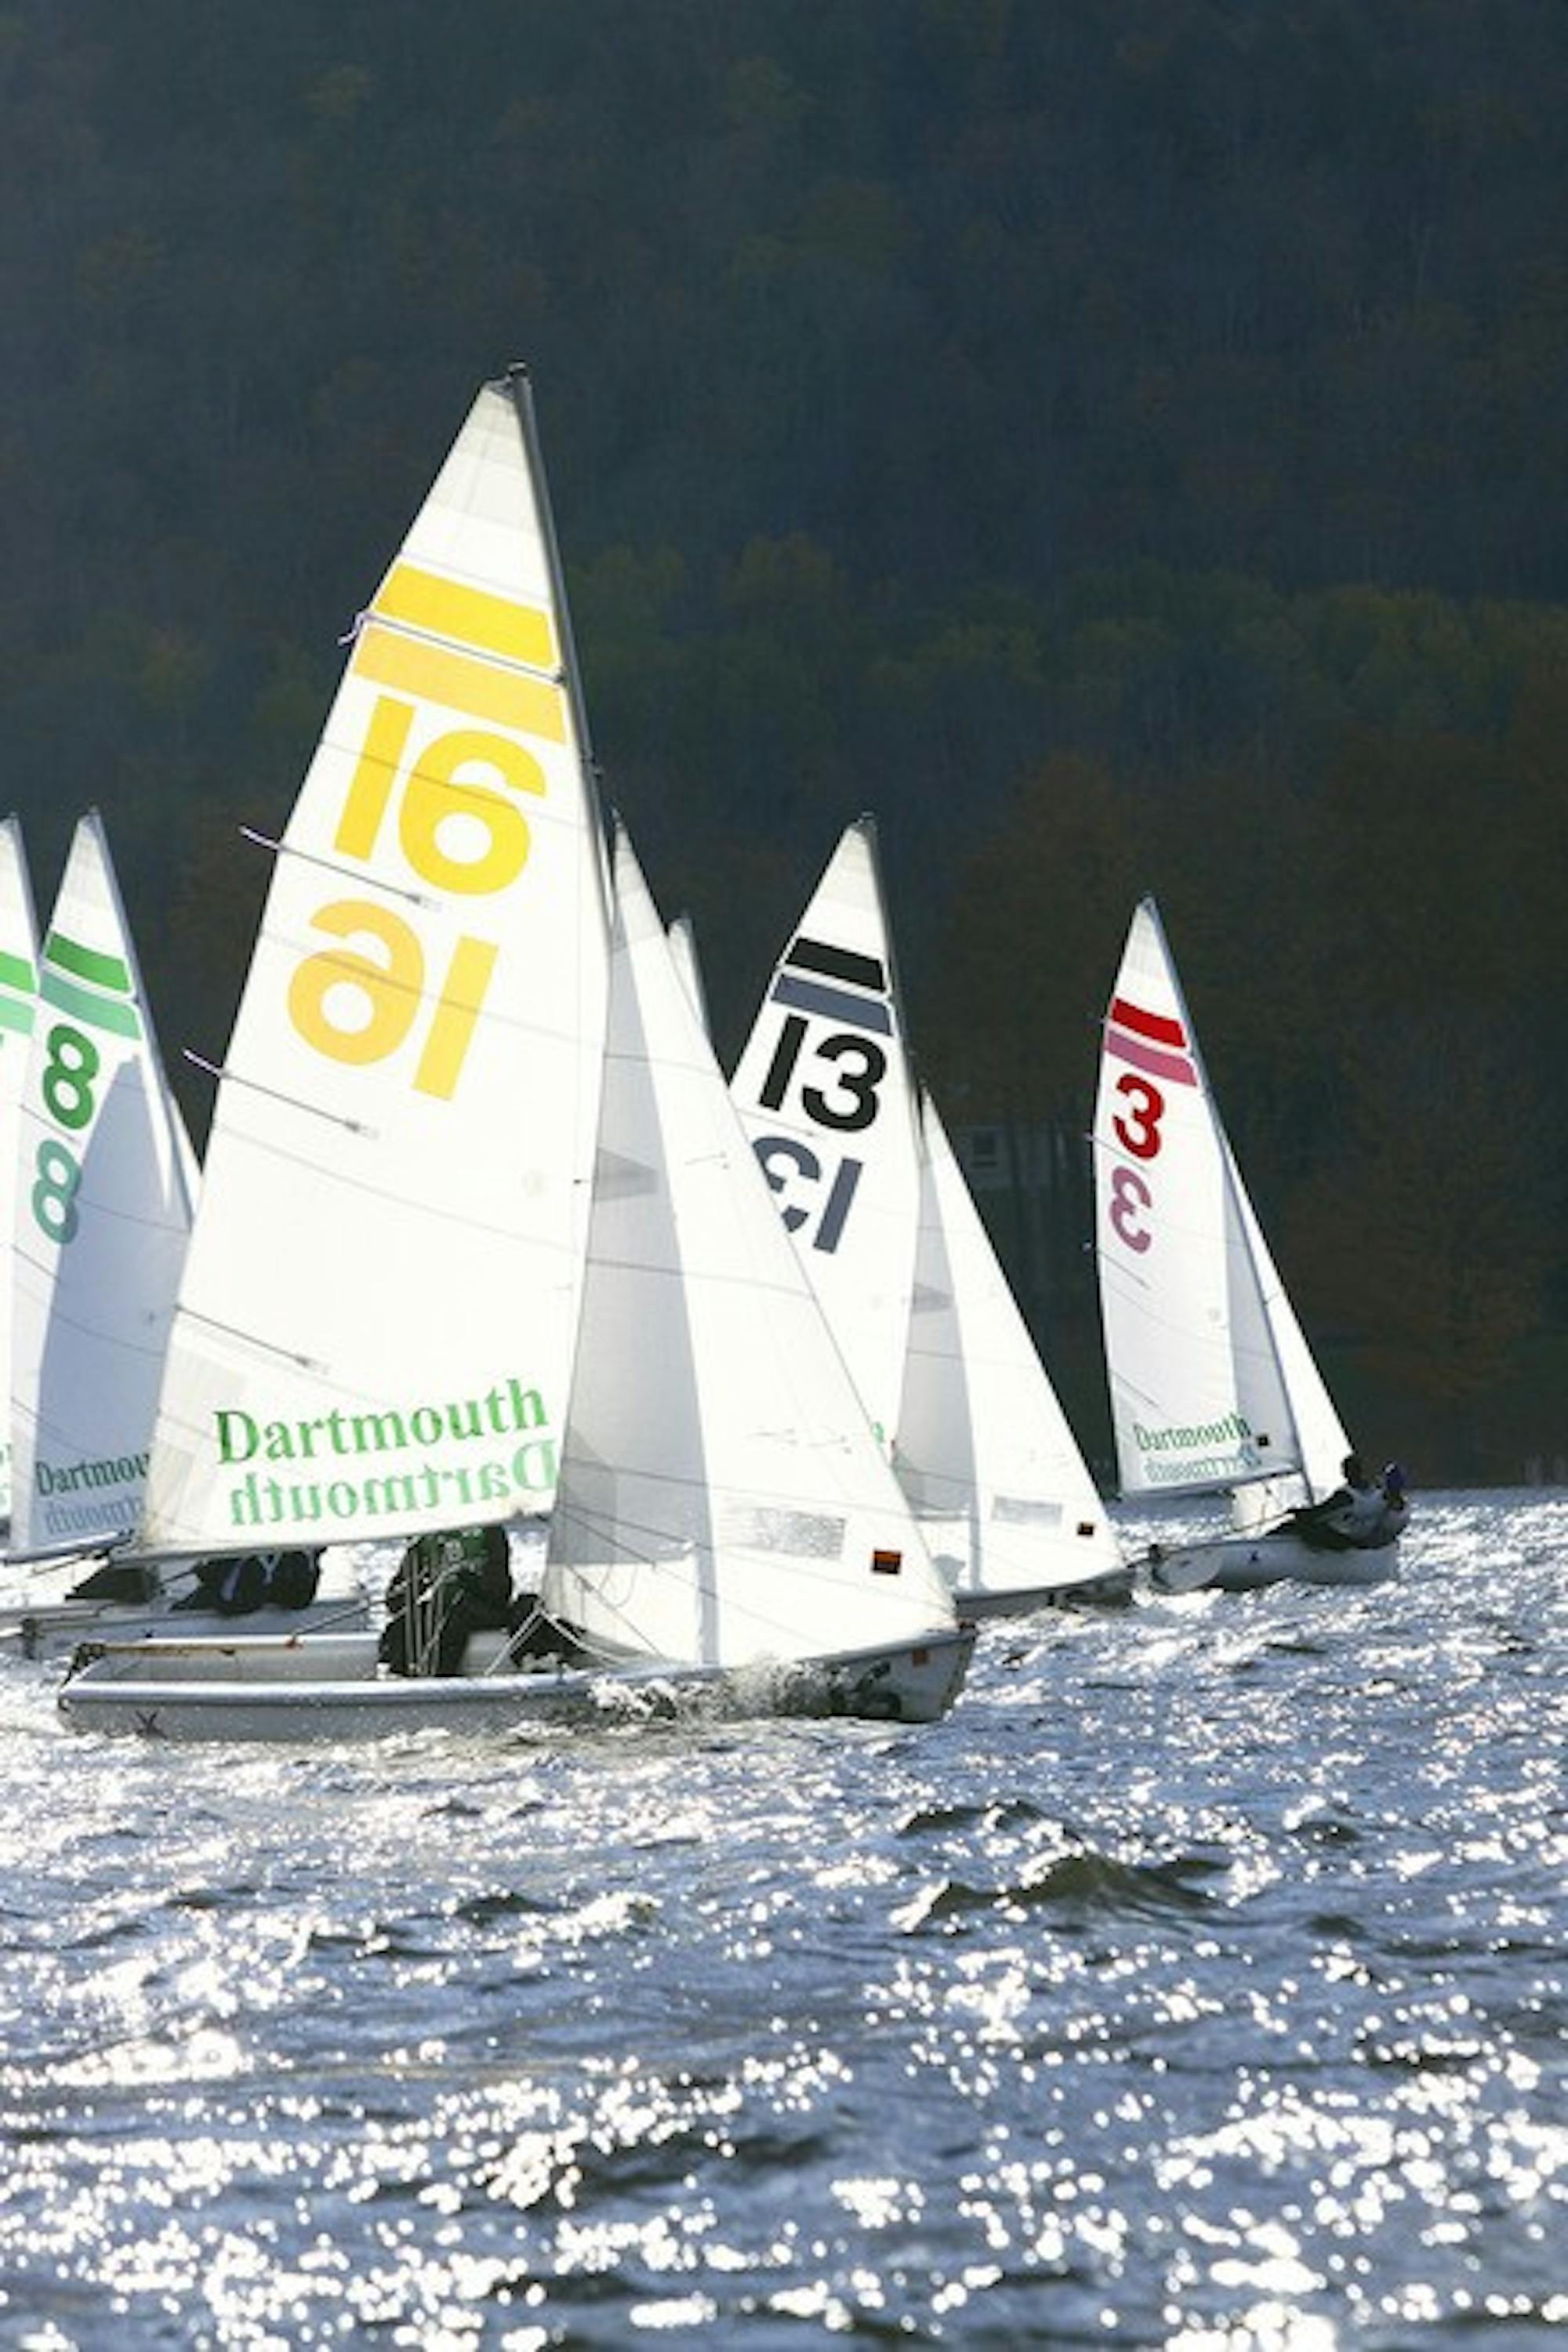 Dartmouth sailing will compete in the ICSA women's national semifinal and the Dinghy National Championship starting today in Austin, Texas.